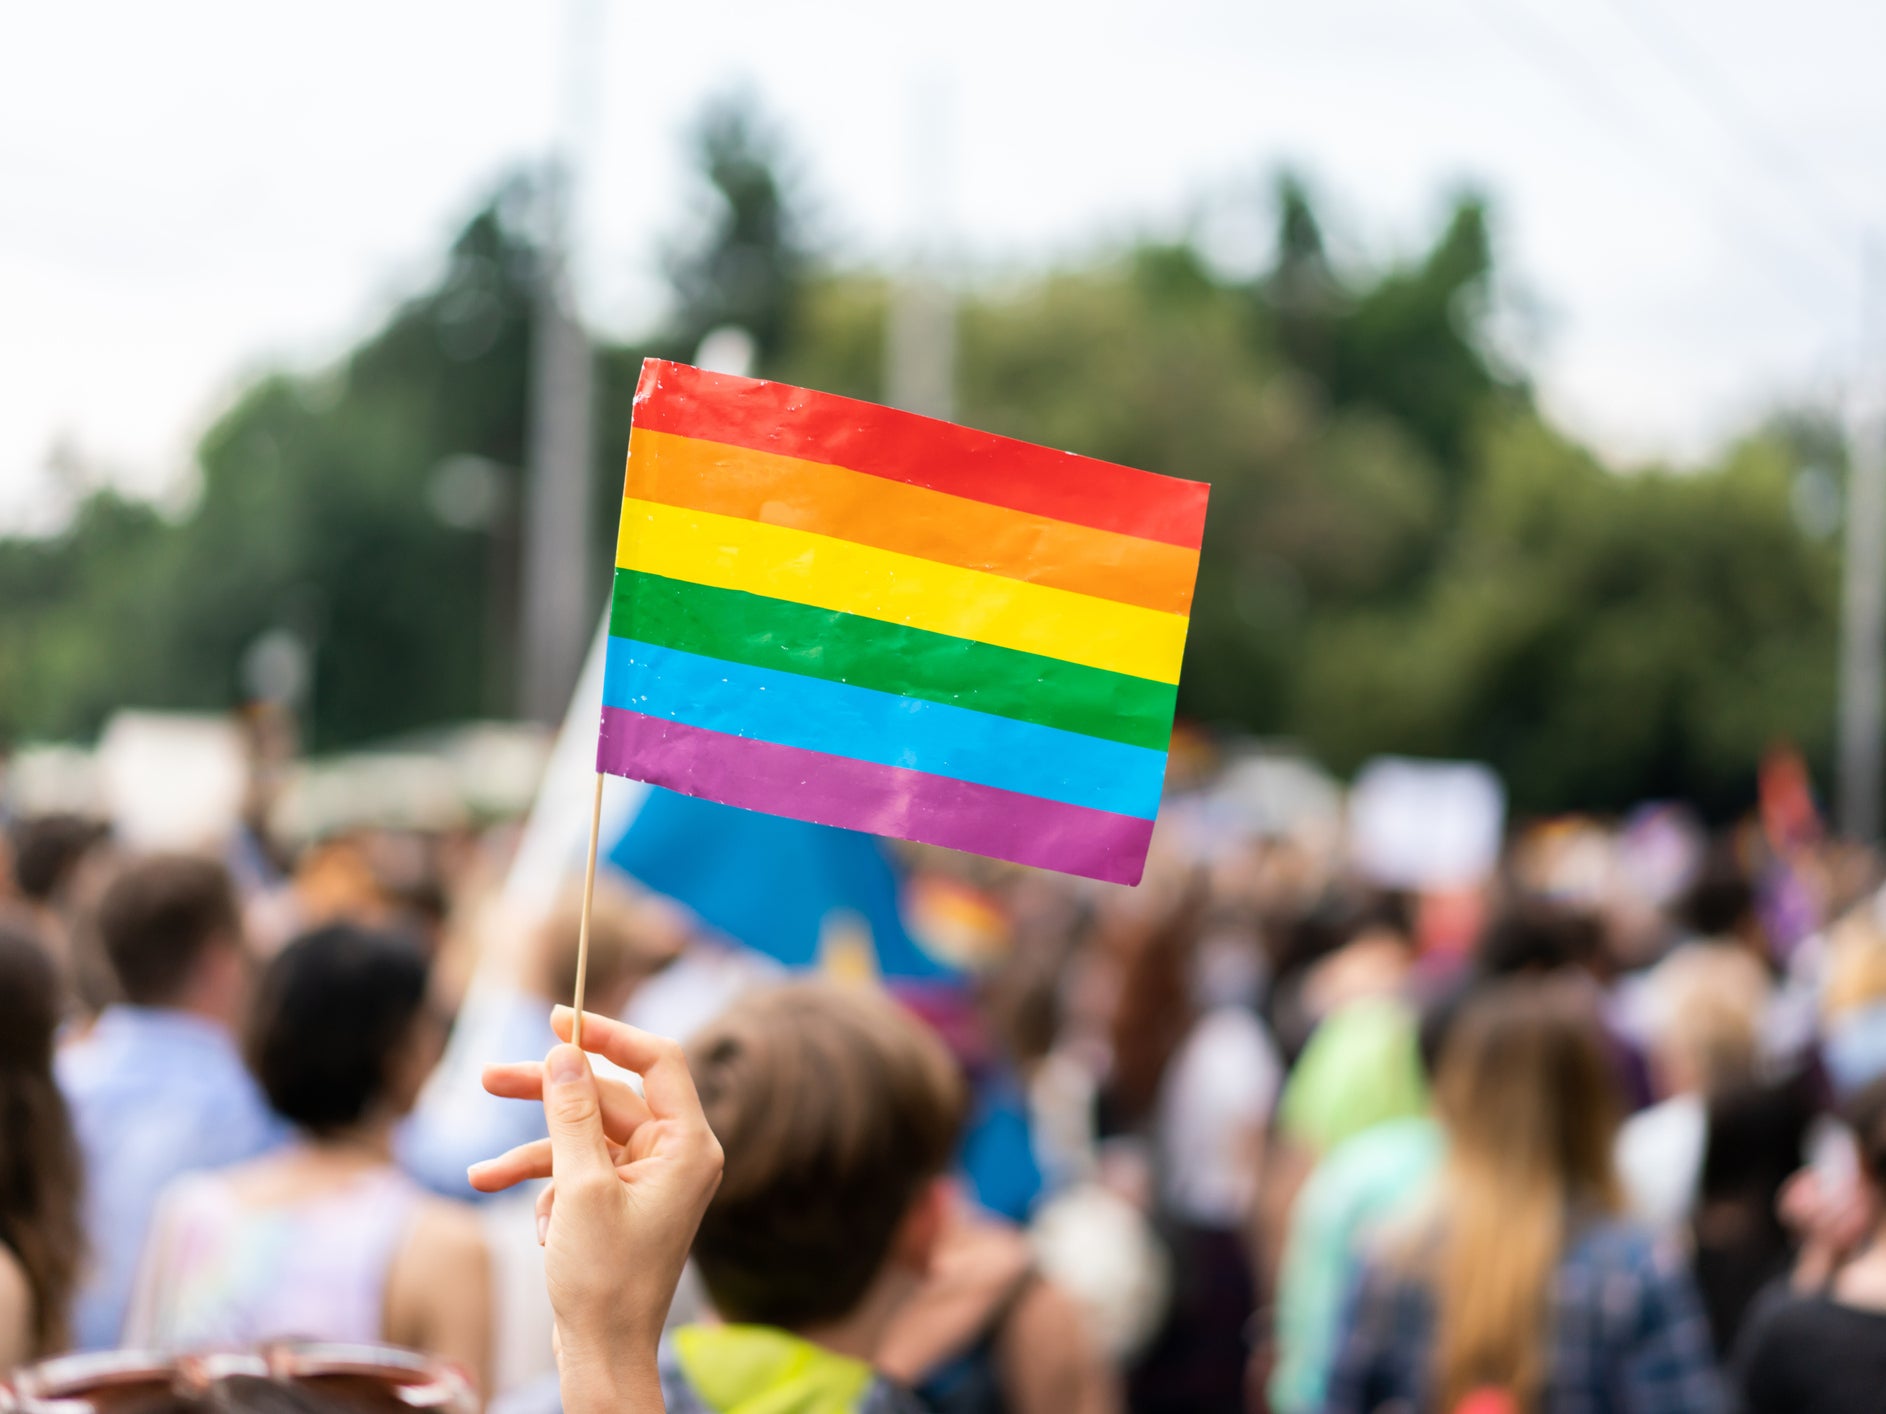 Researchers polled 2,934 secondary school pupils who were aged between 11 and 18 - over a third of which were LGBT+